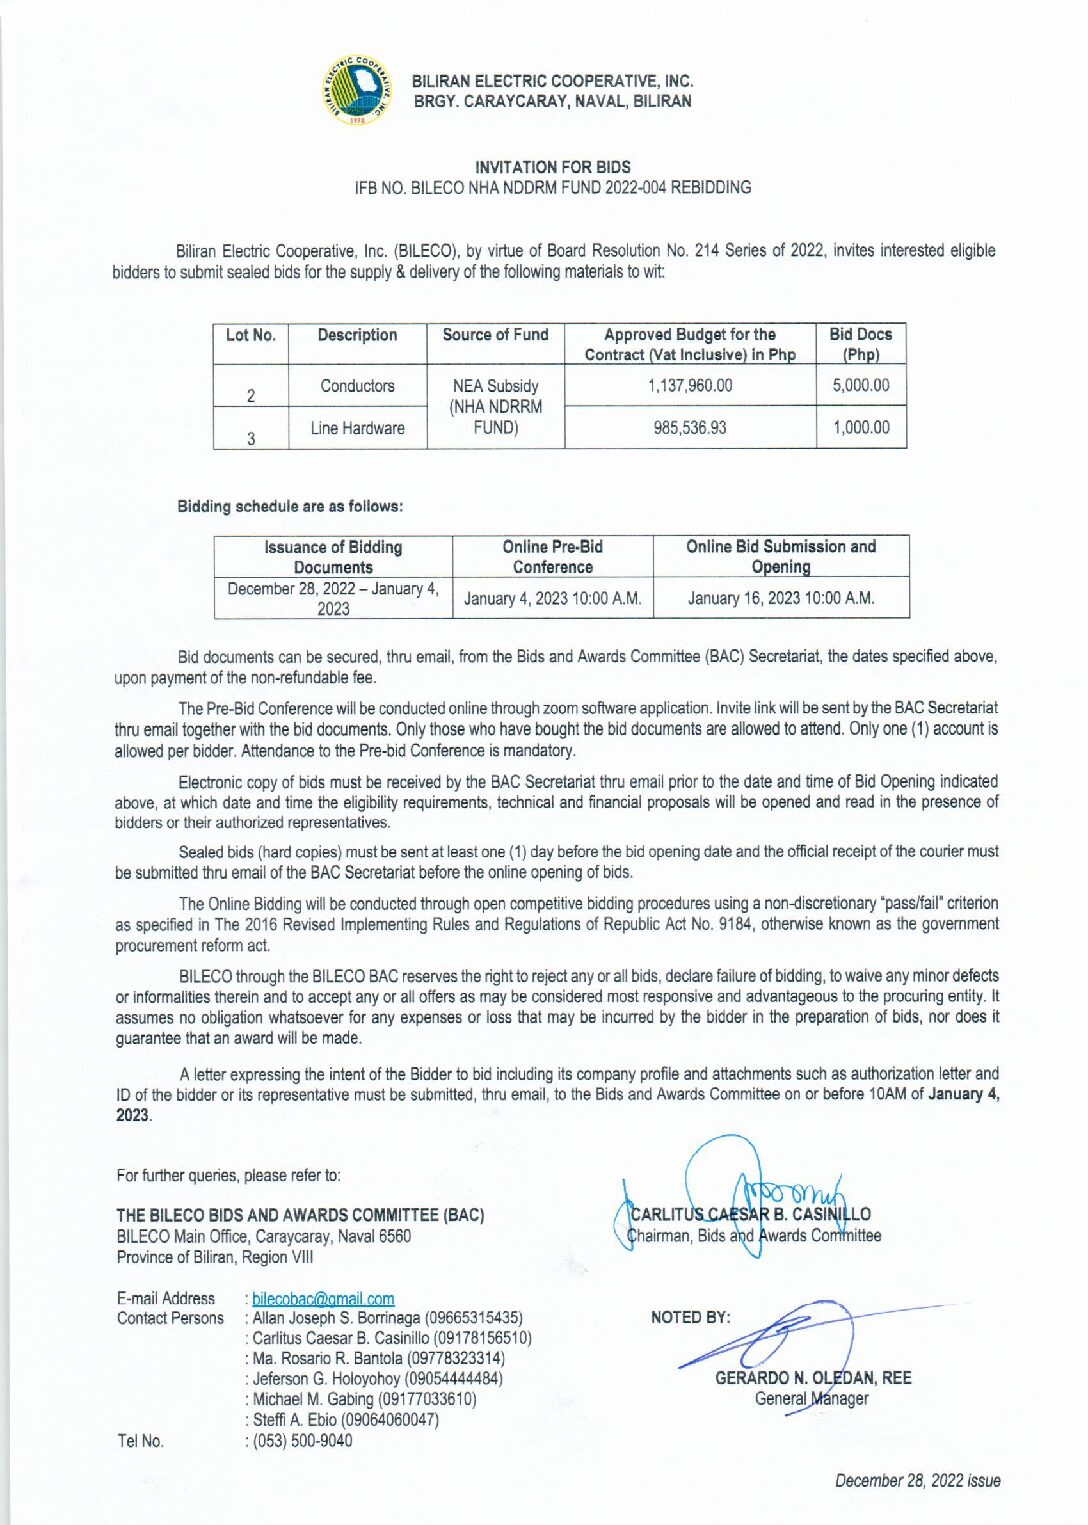 You are currently viewing Invitation for Bids re: IFB NO. BILECO NHA NDRRM FUND 2022-004 REBIDDING